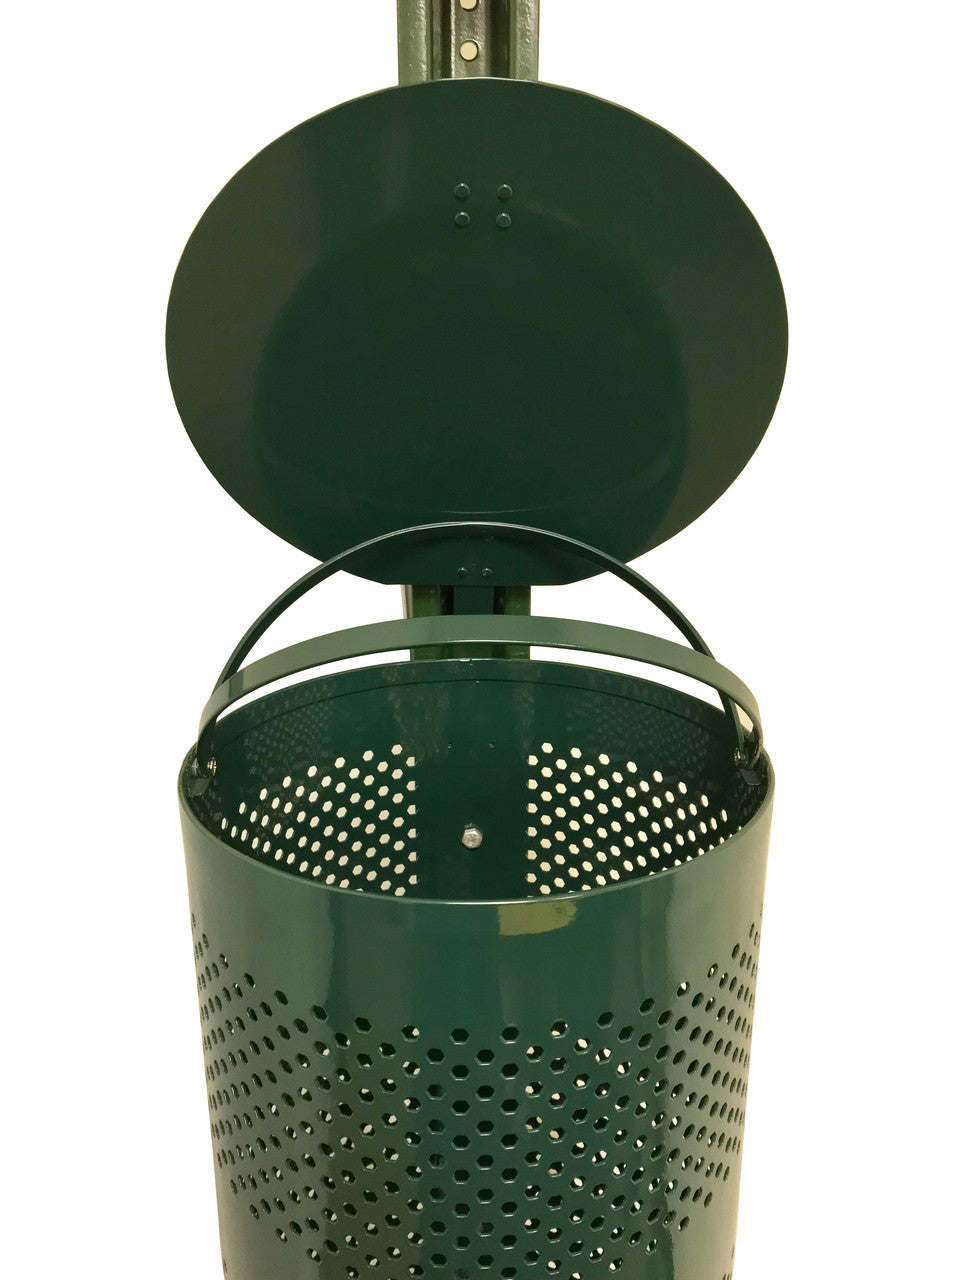 Poop bags 10 Gallon Trash Receptacle Has Loop Clamps

Trash receptacle has built in loop clamps to hold trash liner in place.

Non-locking lid with hinge to keep lid secure.

Mesh receptacle allows for water to escape and not pool with debris.